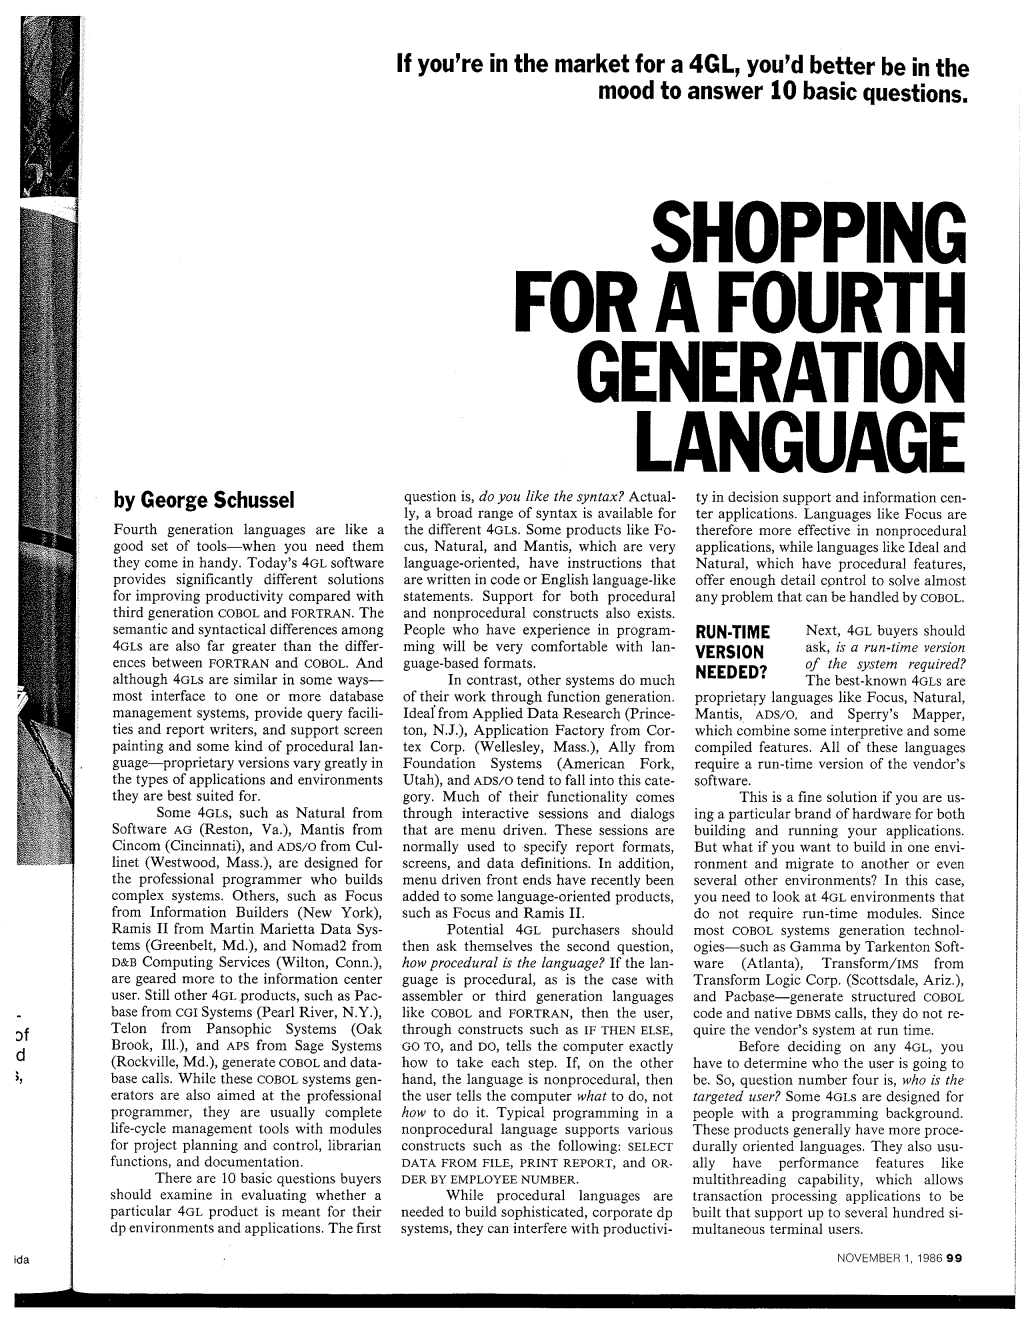 Shopping for a Fourth Generation Language